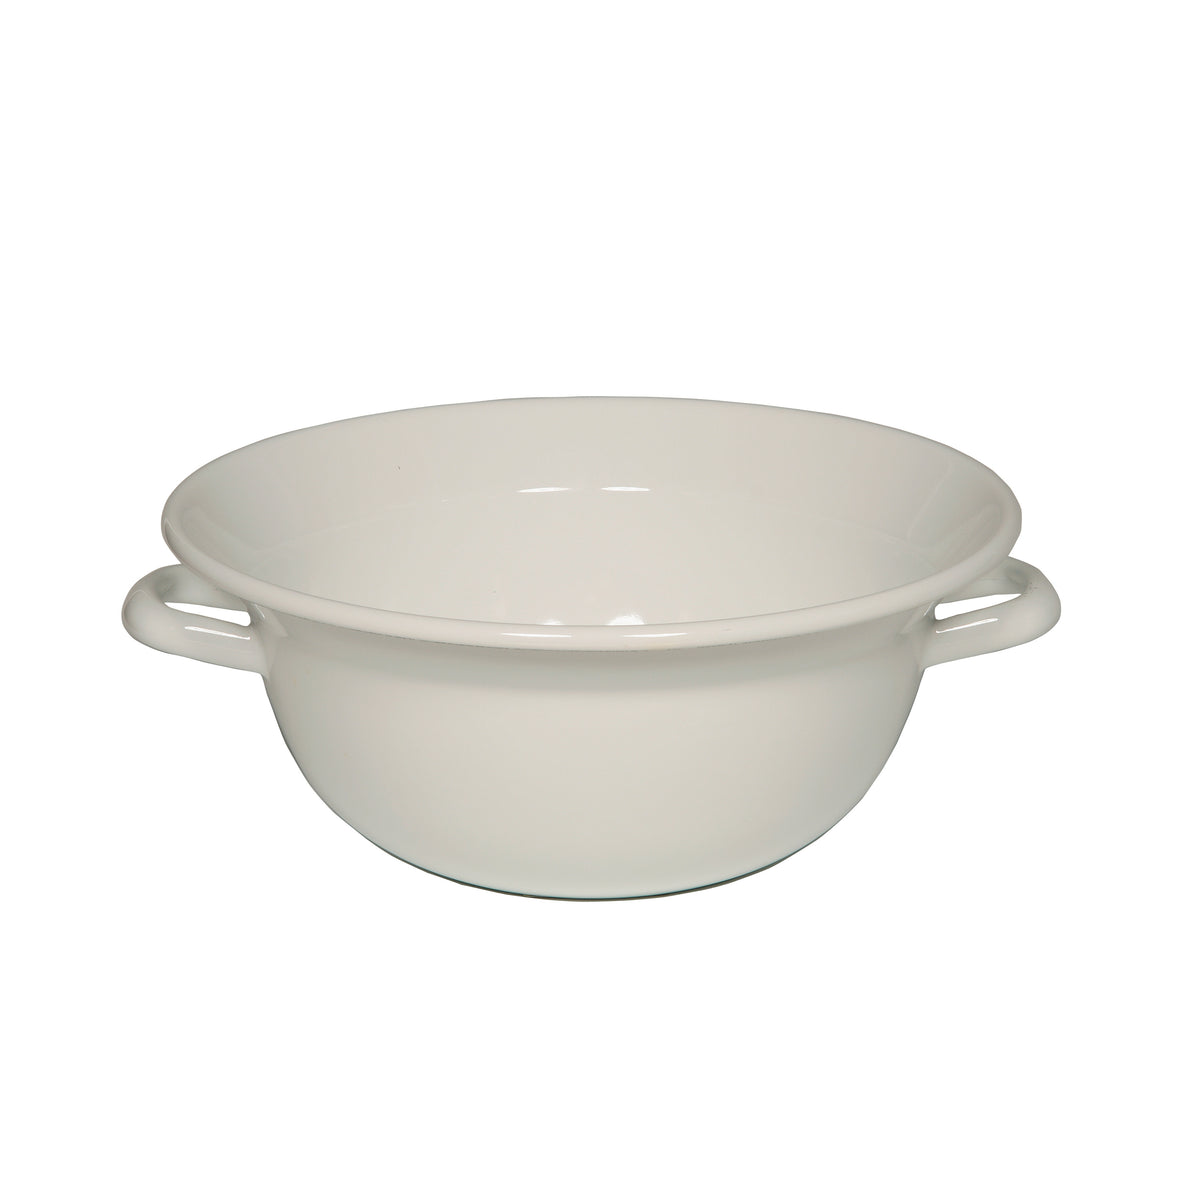 Riess, Medium bowl with two handles, Plates & Bowls,